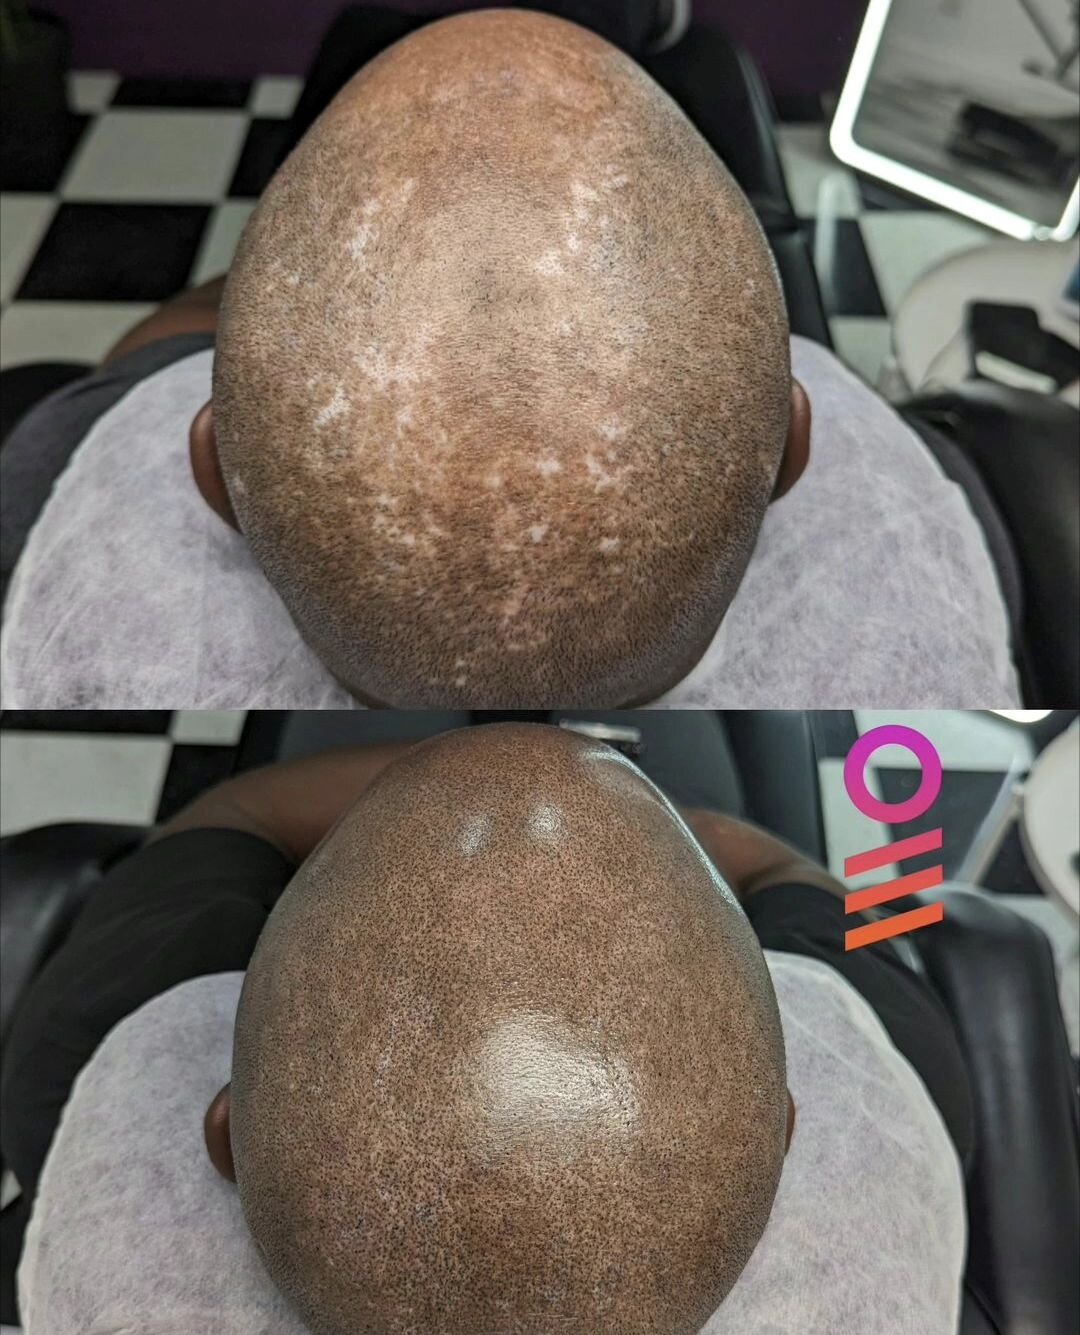 Amazing #vitiligo SMP session went down today with @theinkbarber !!!

Scalp Micropigmentation done by Shannon at @ink.barber 💈🔥

#hairlosssolution
#scalptreatment
#scalpmicropigmentation #micropigmentation #smpvancouver #scalptattoo